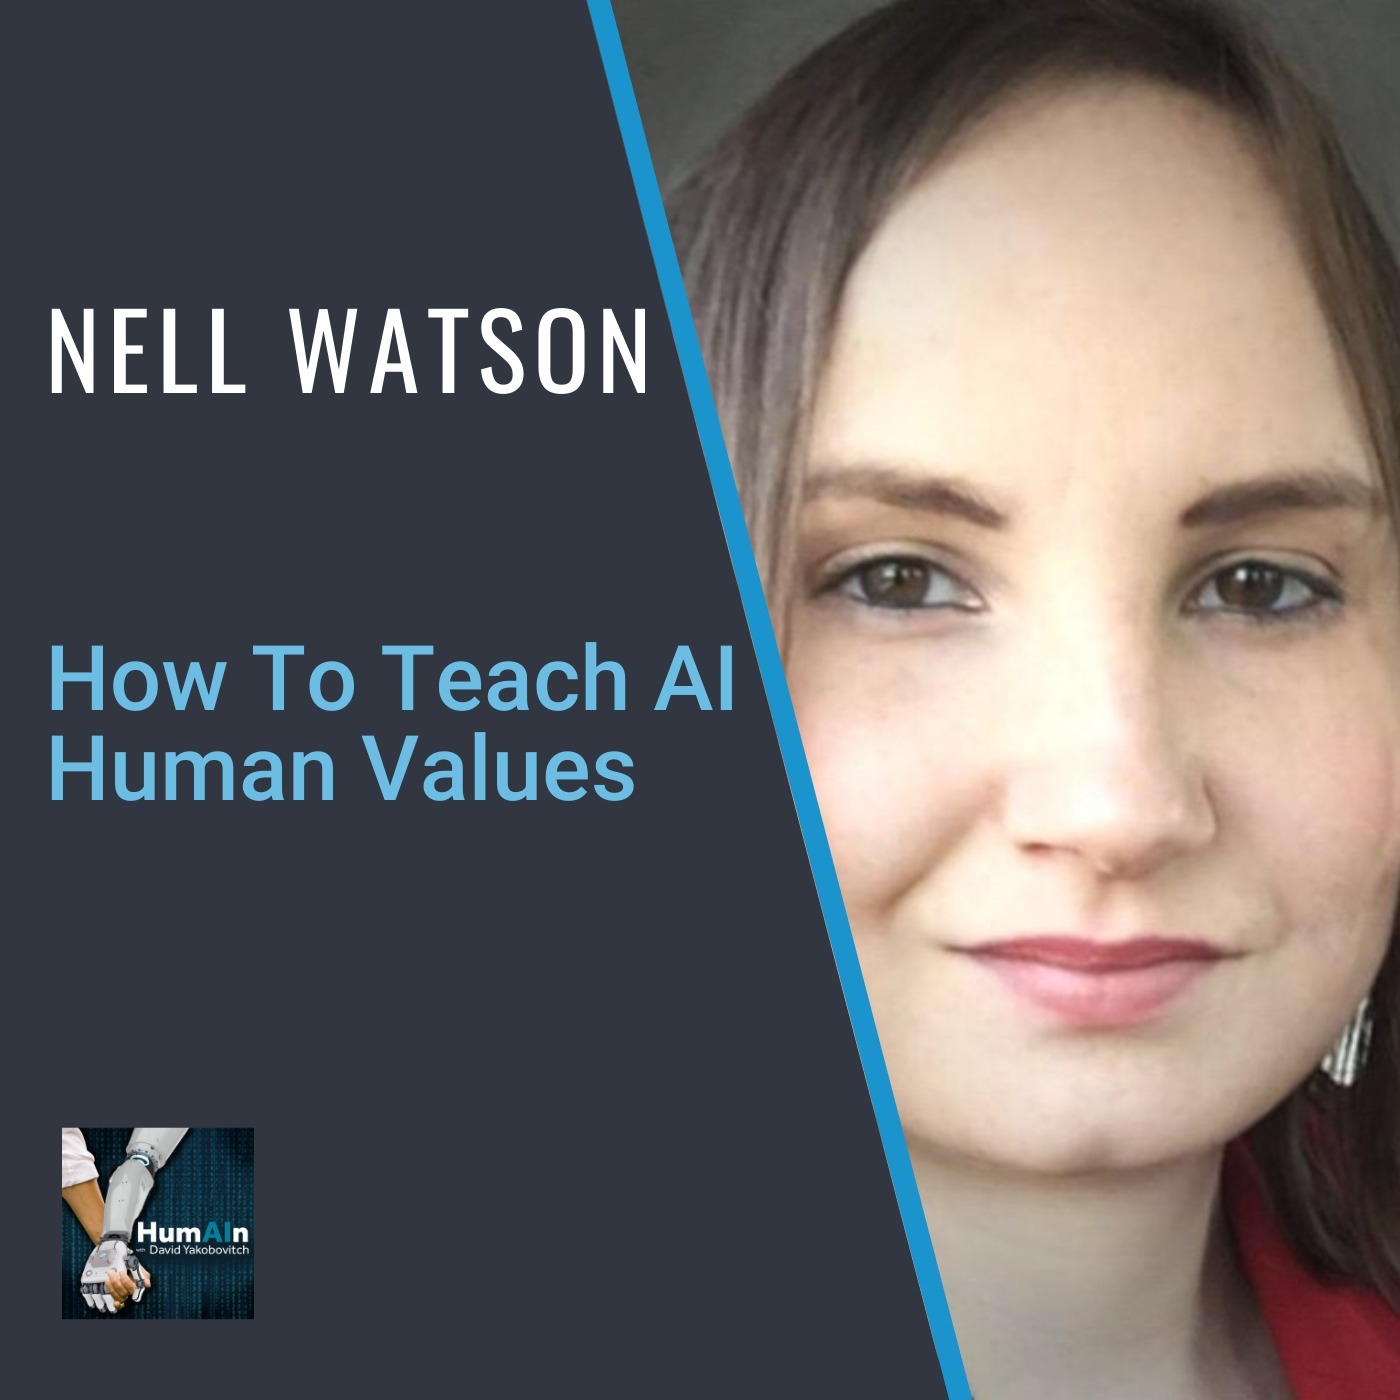 Nell Watson: How To Teach AI Human Values